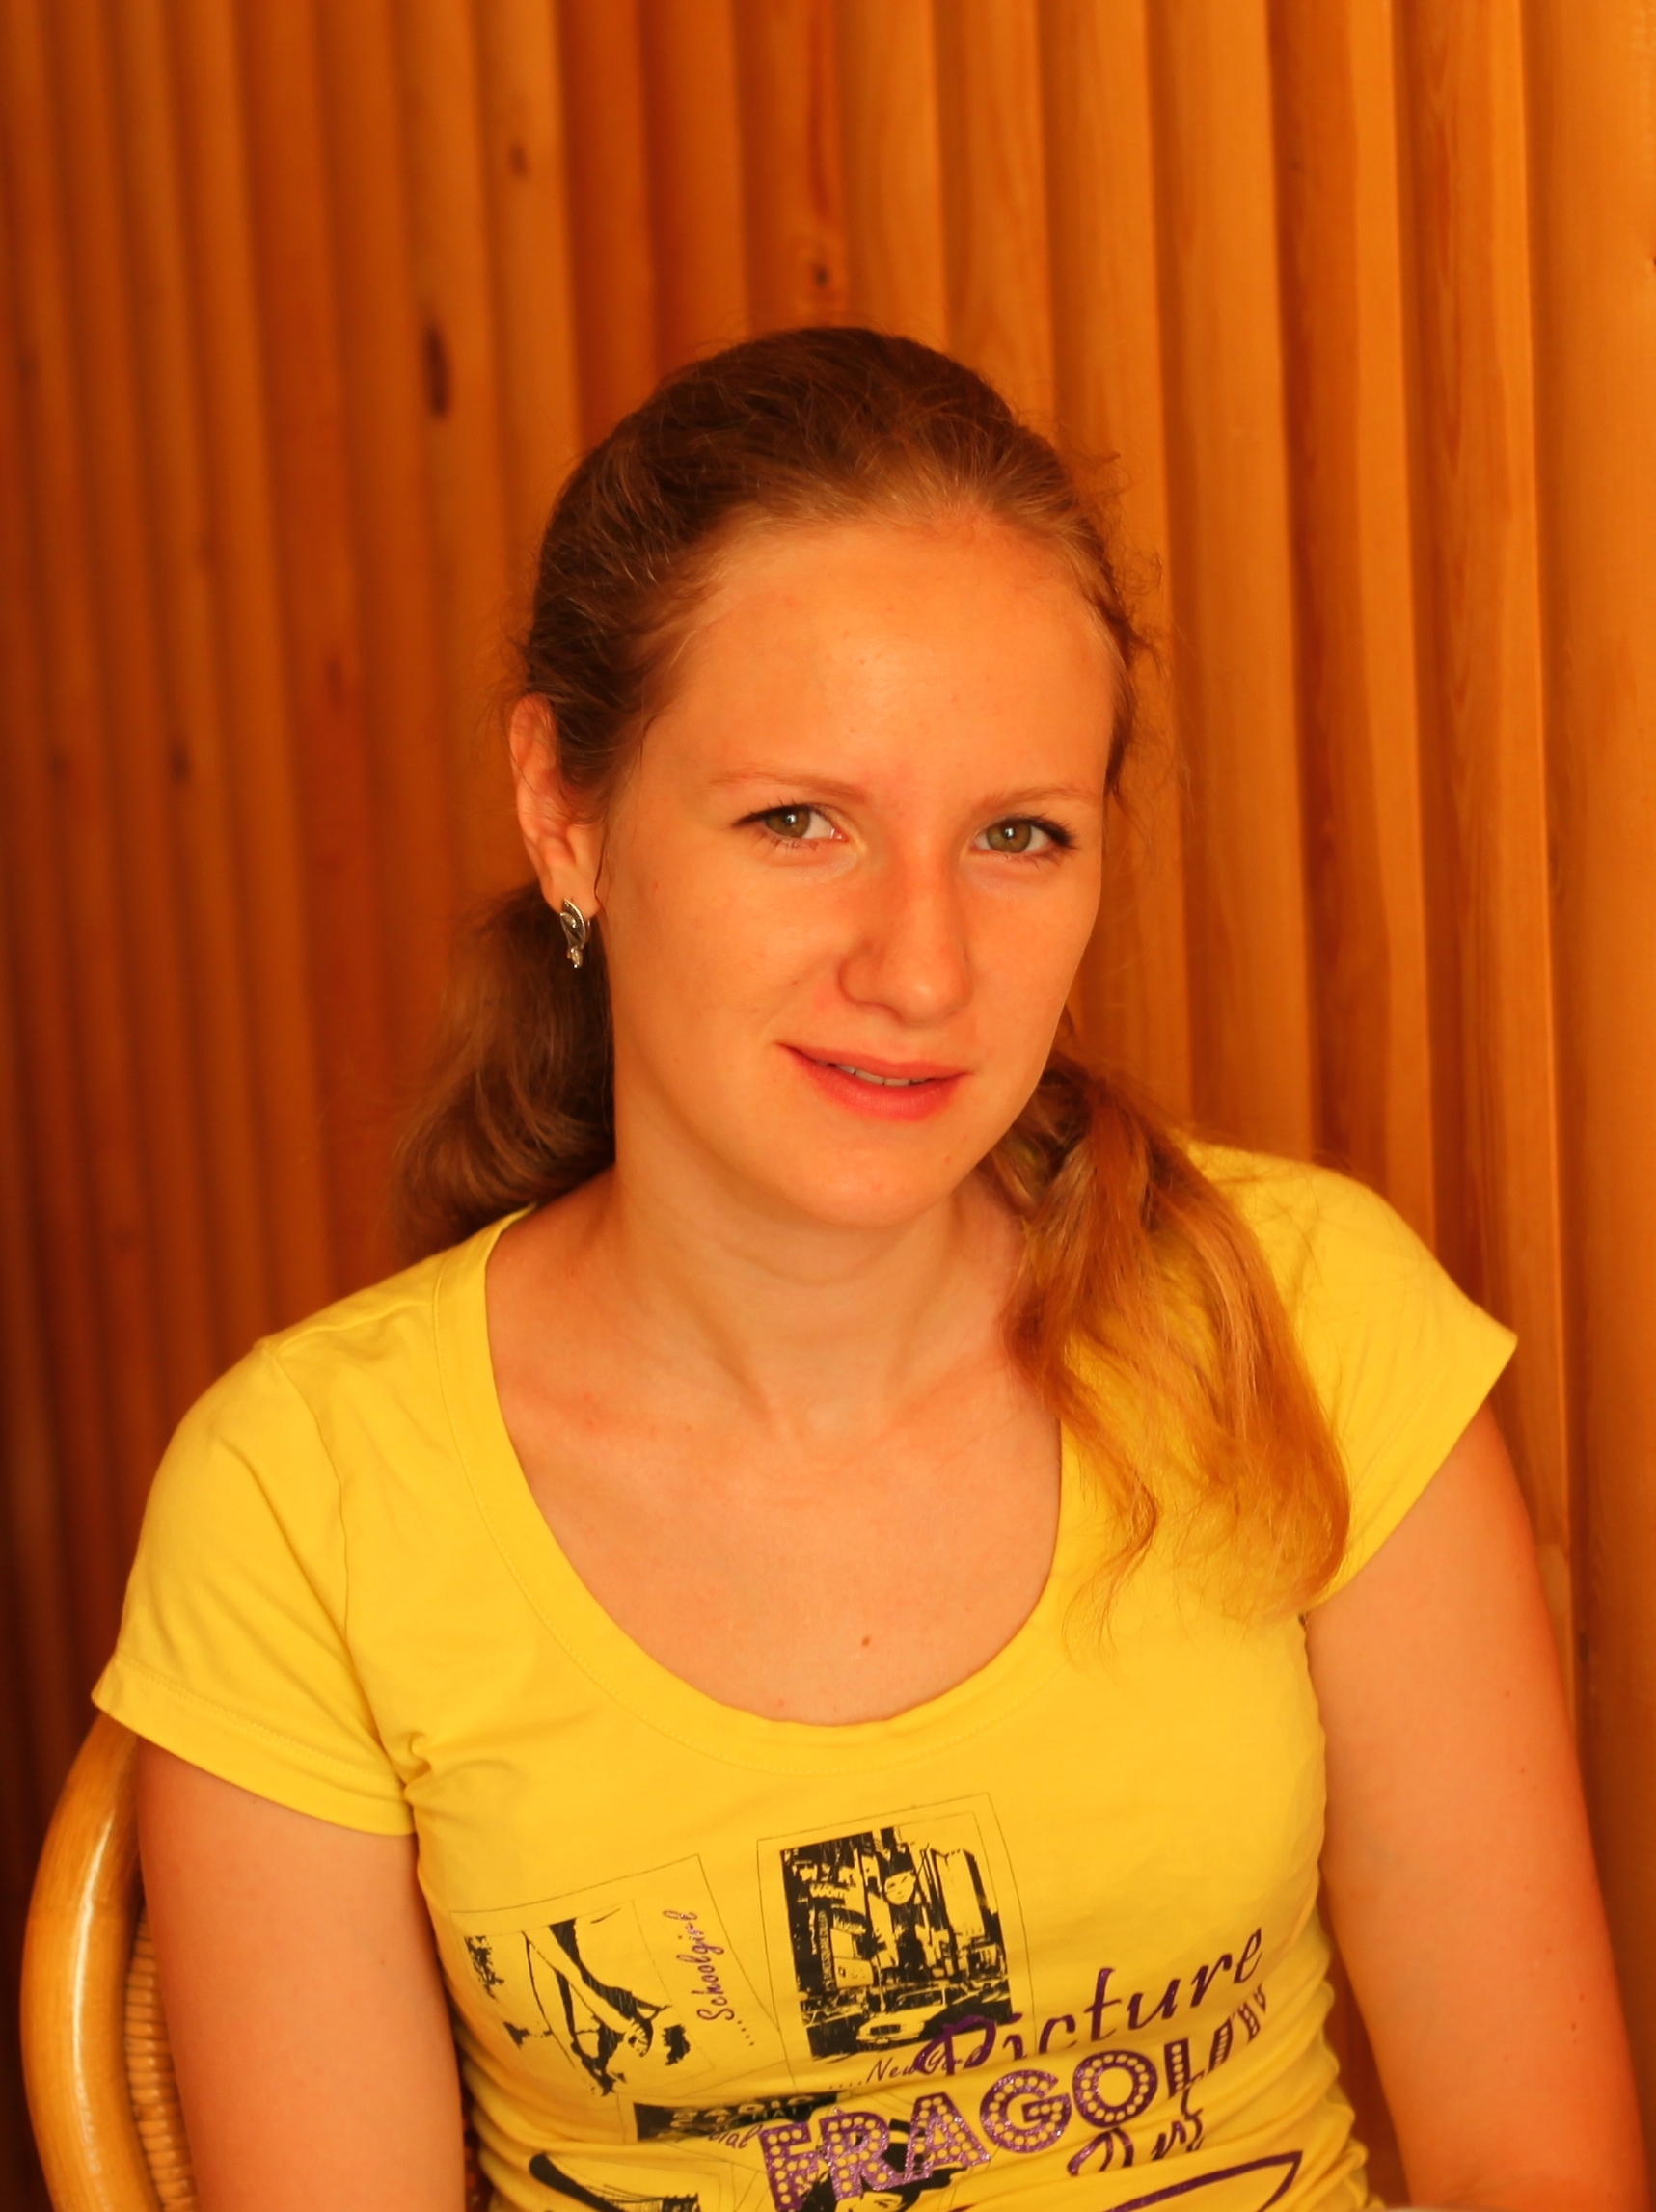 A beautiful blond girl in a yellow t-shirt